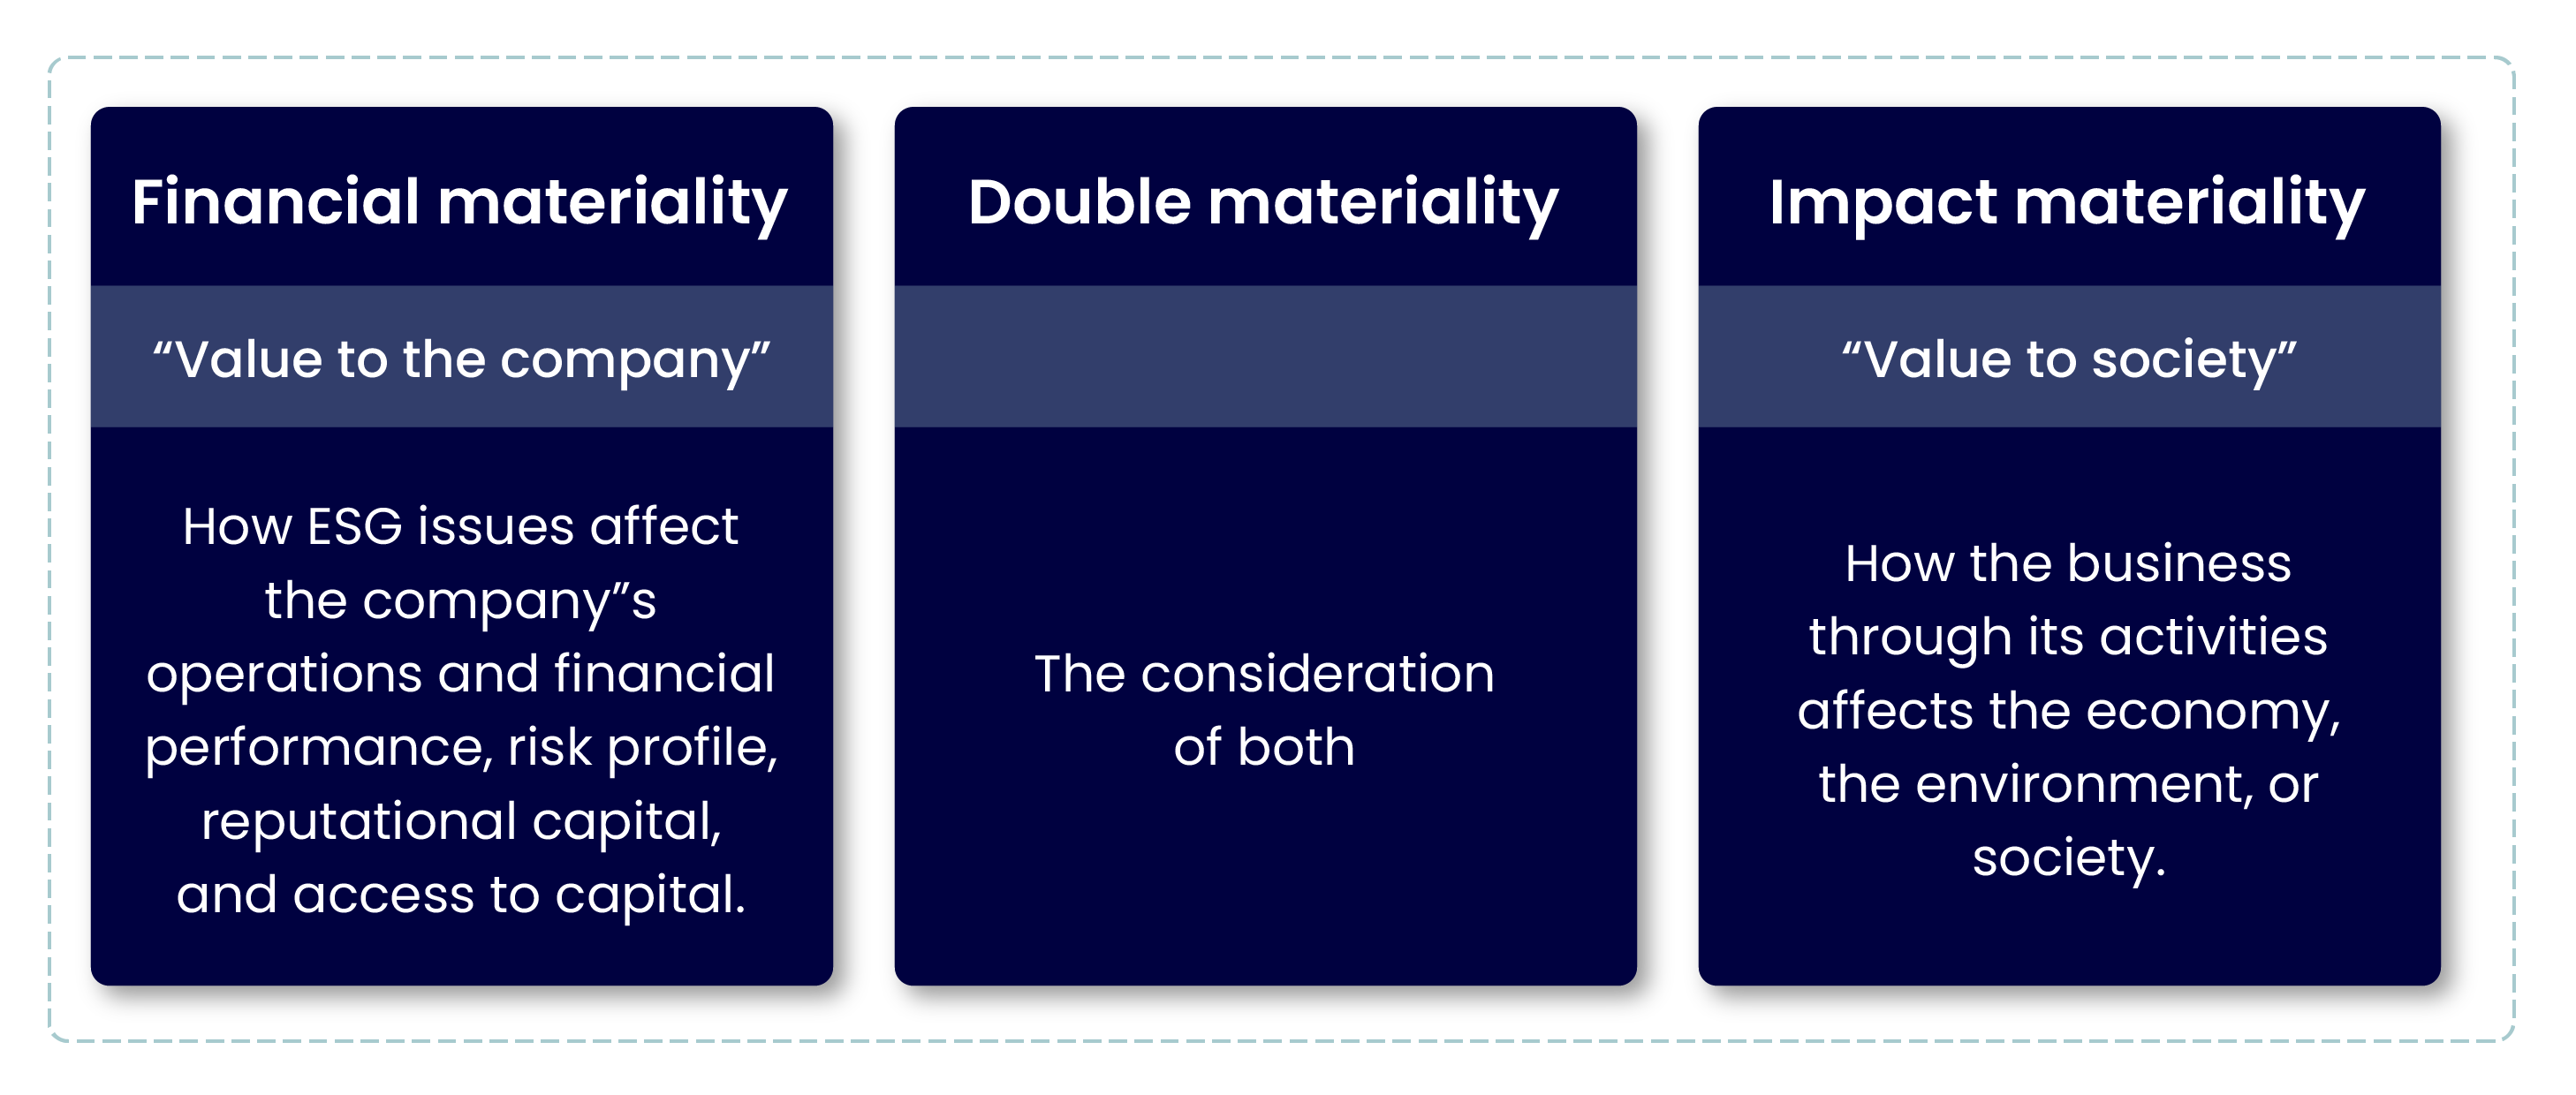 dimensions of materiality